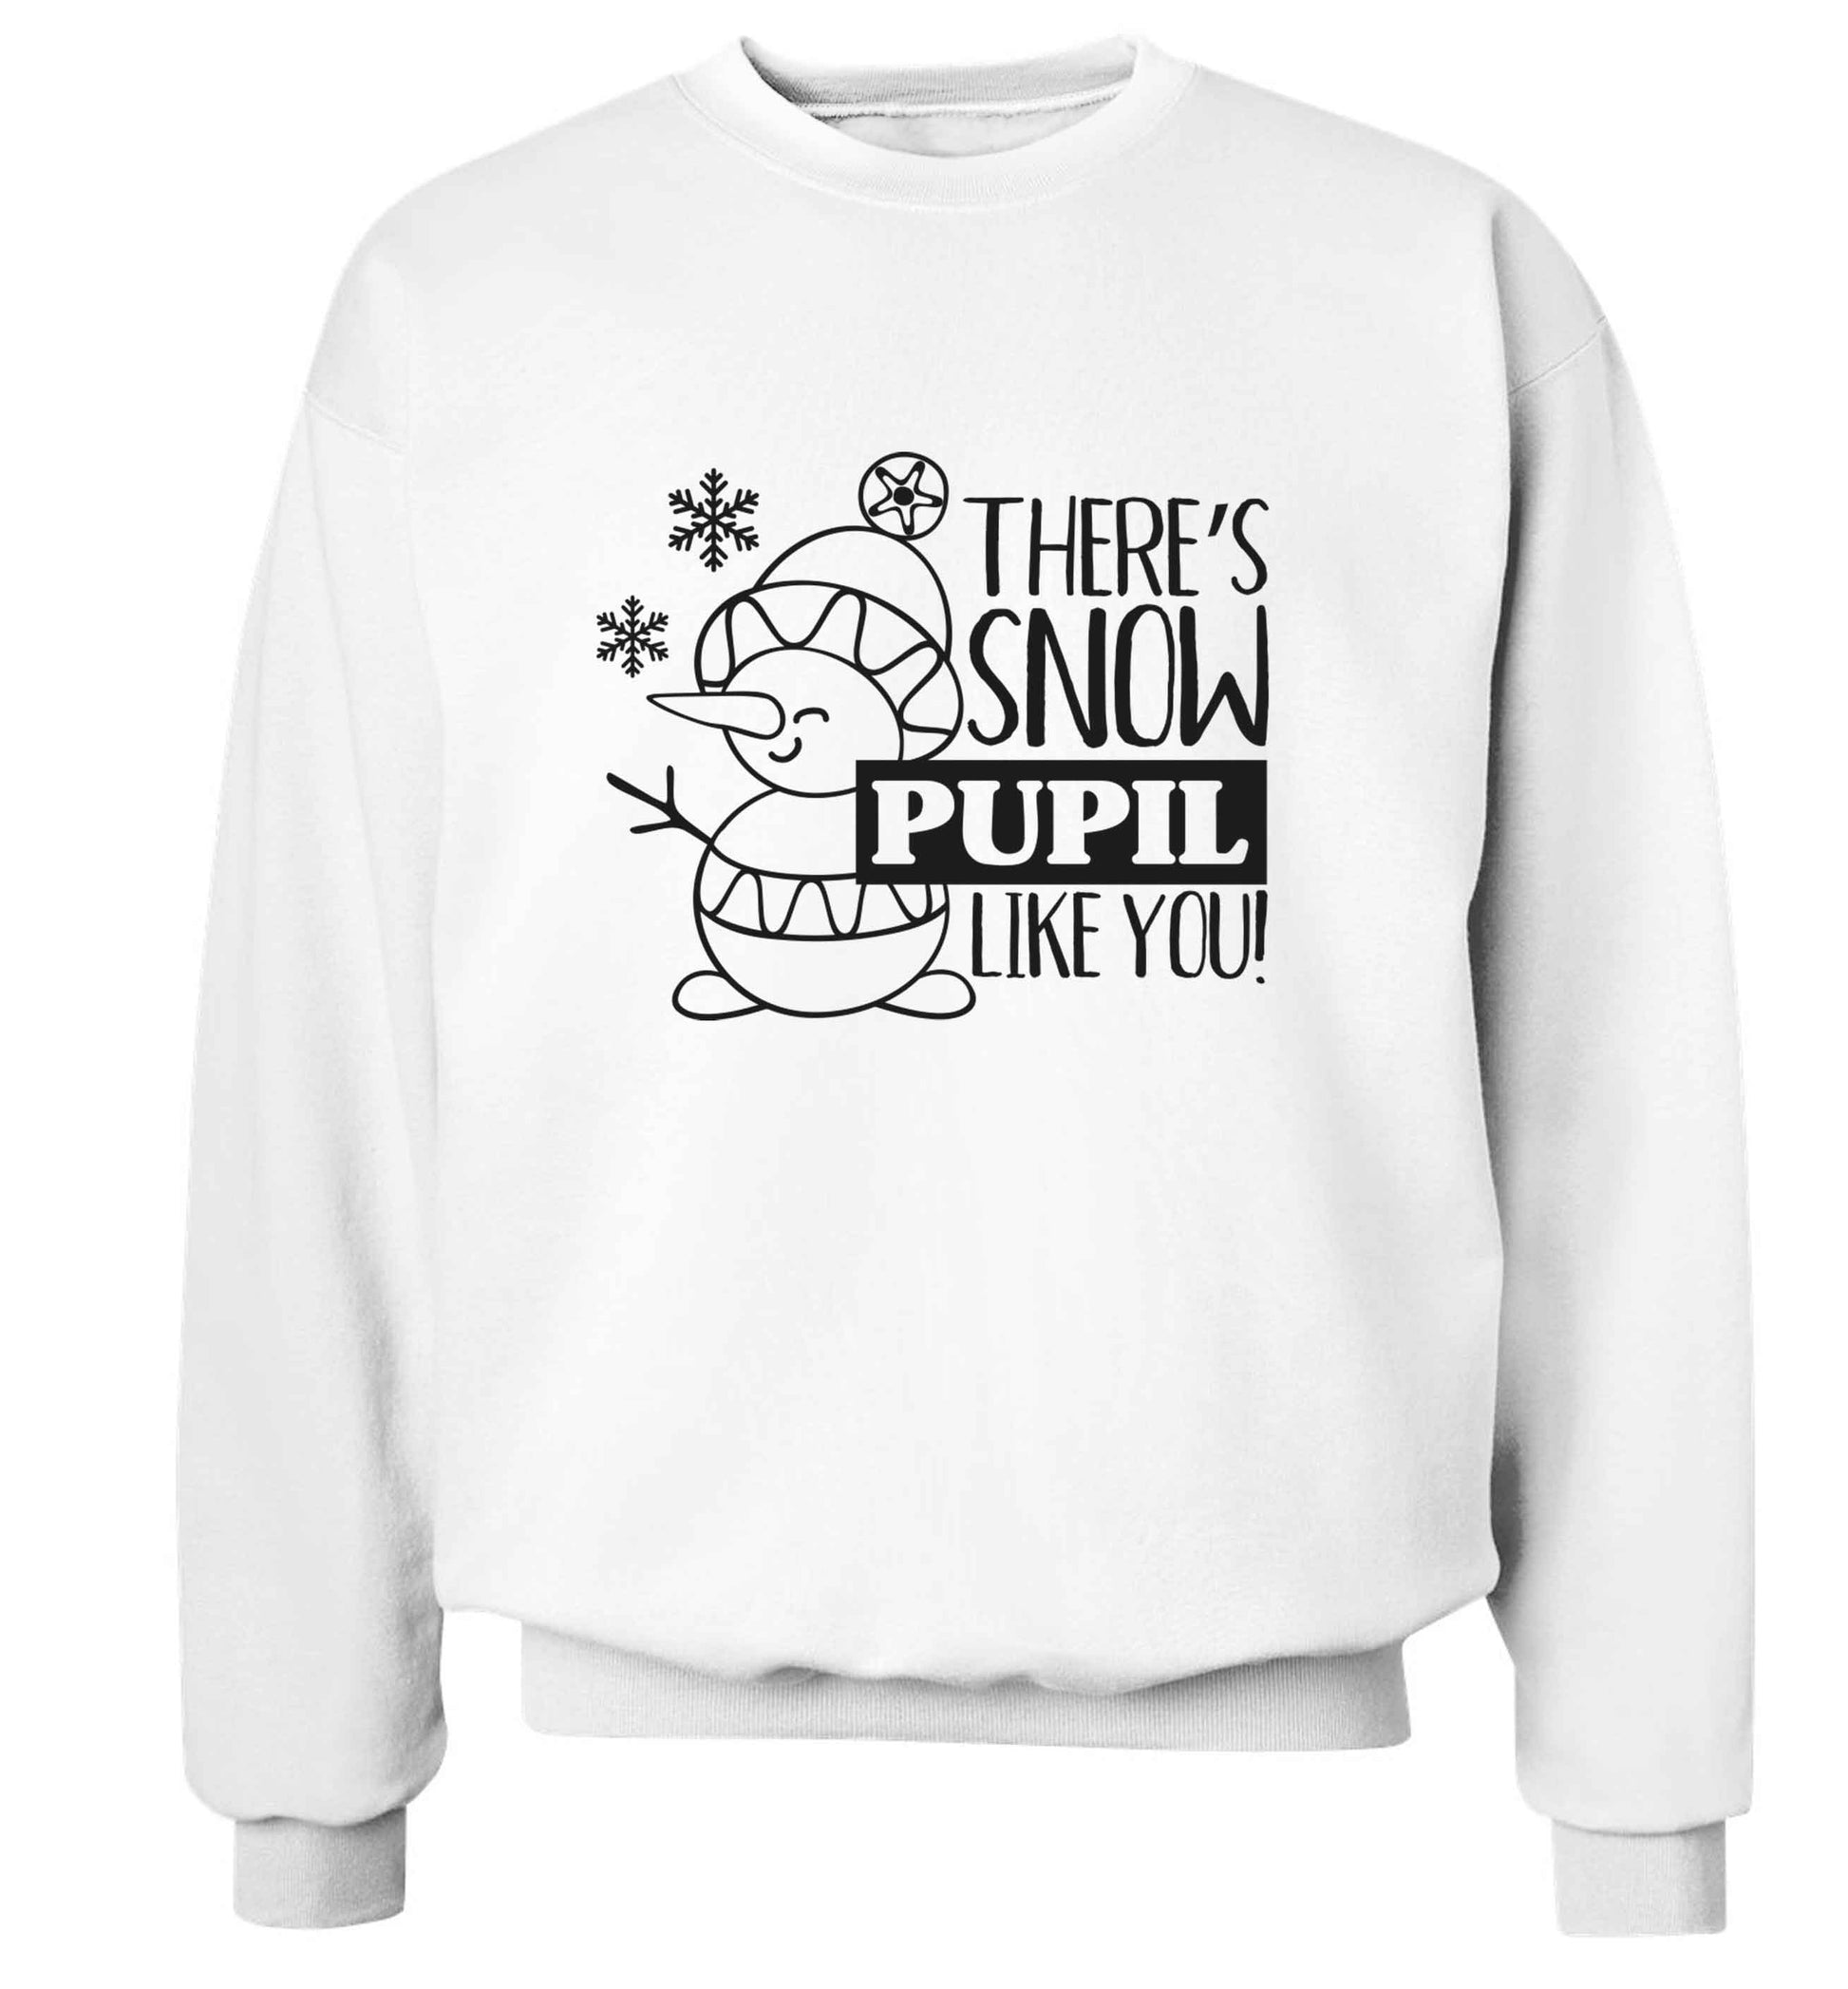 There's snow pupil like you adult's unisex white sweater 2XL